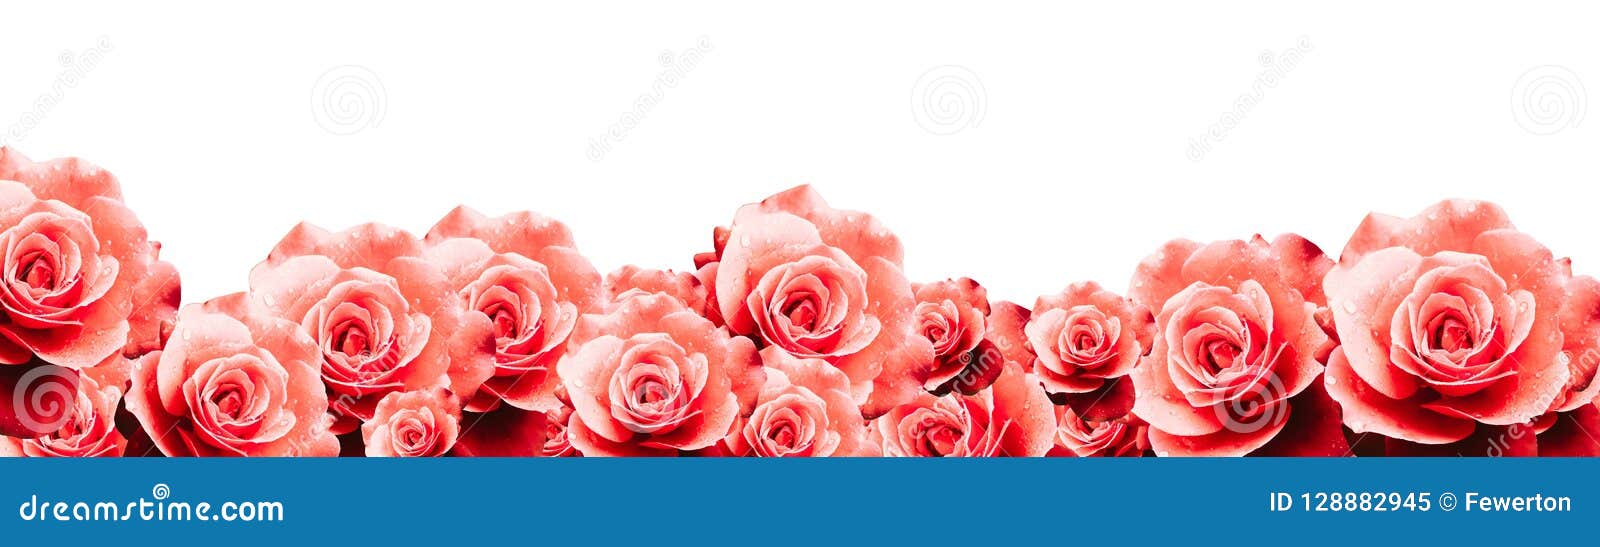 red roses floral border frame background with wet red pink white roses flowers closeup pattern border panorama.